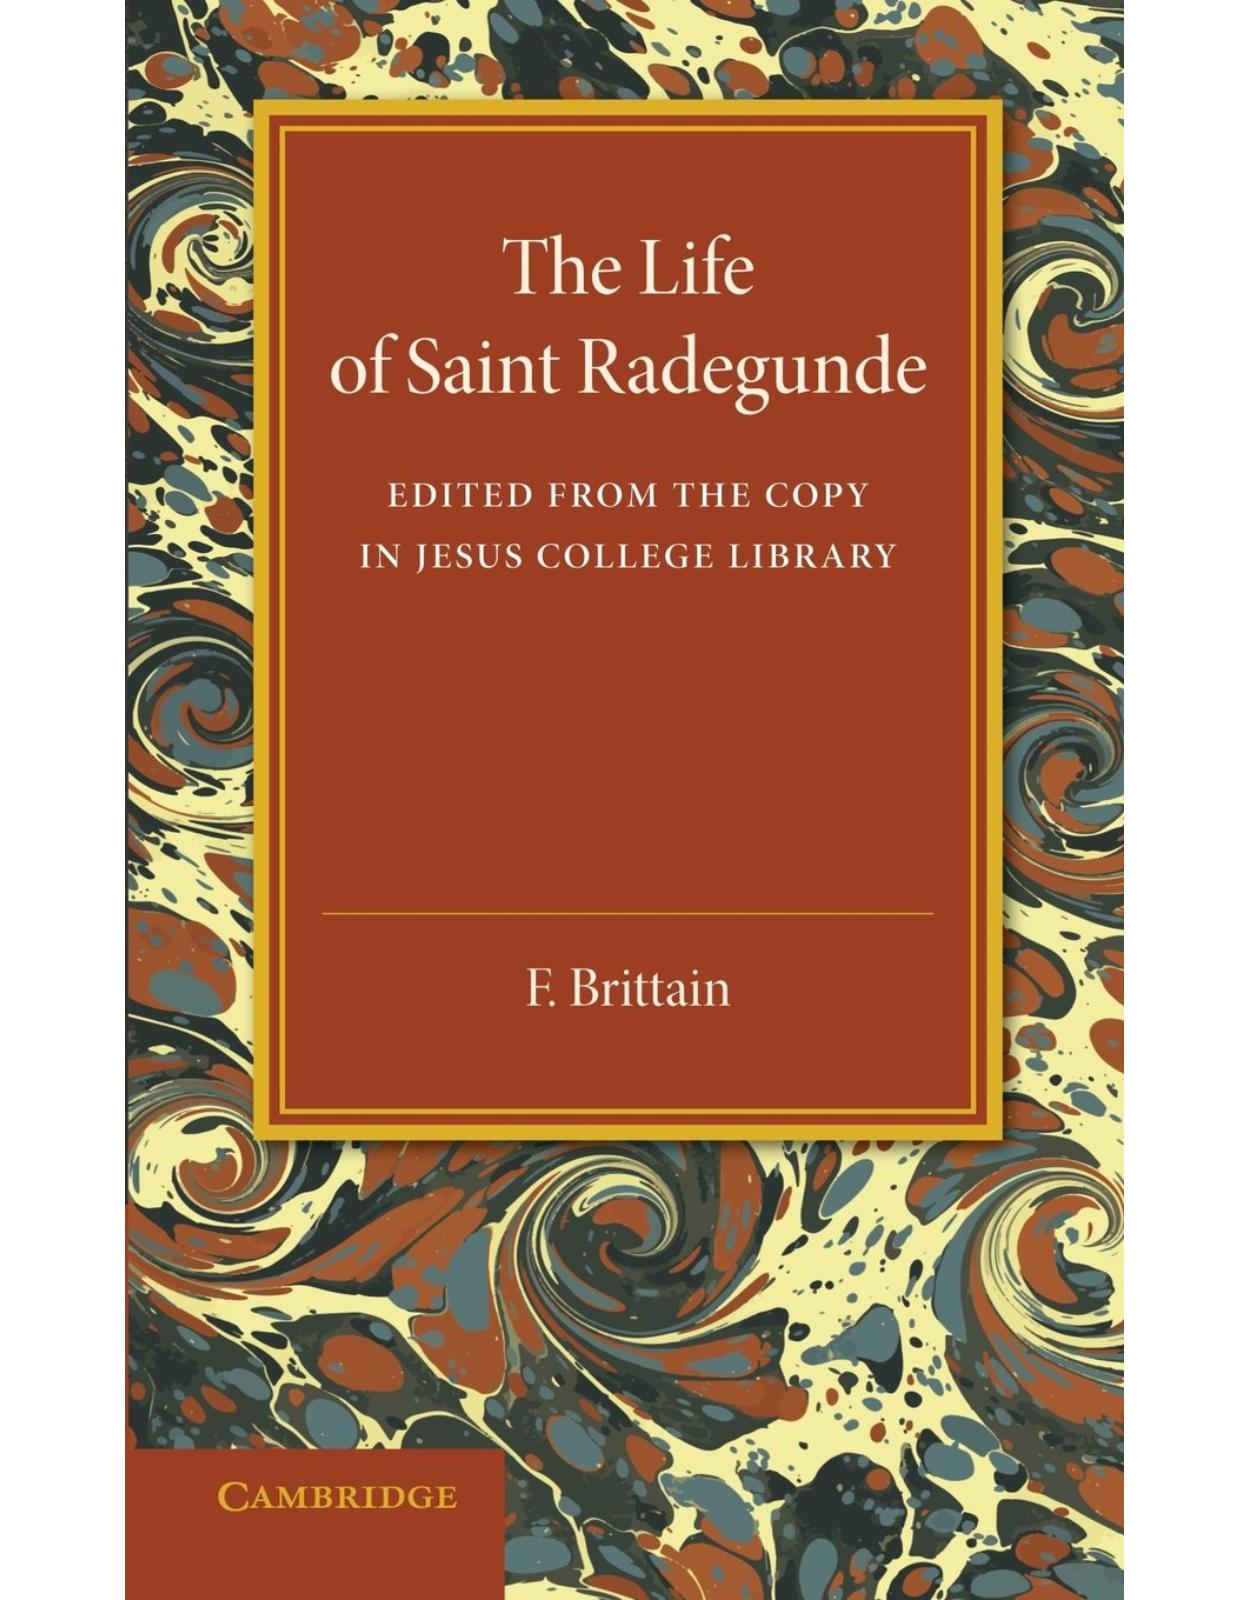 The Lyfe of Saynt Radegunde: Edited from the Copy in Jesus College Library